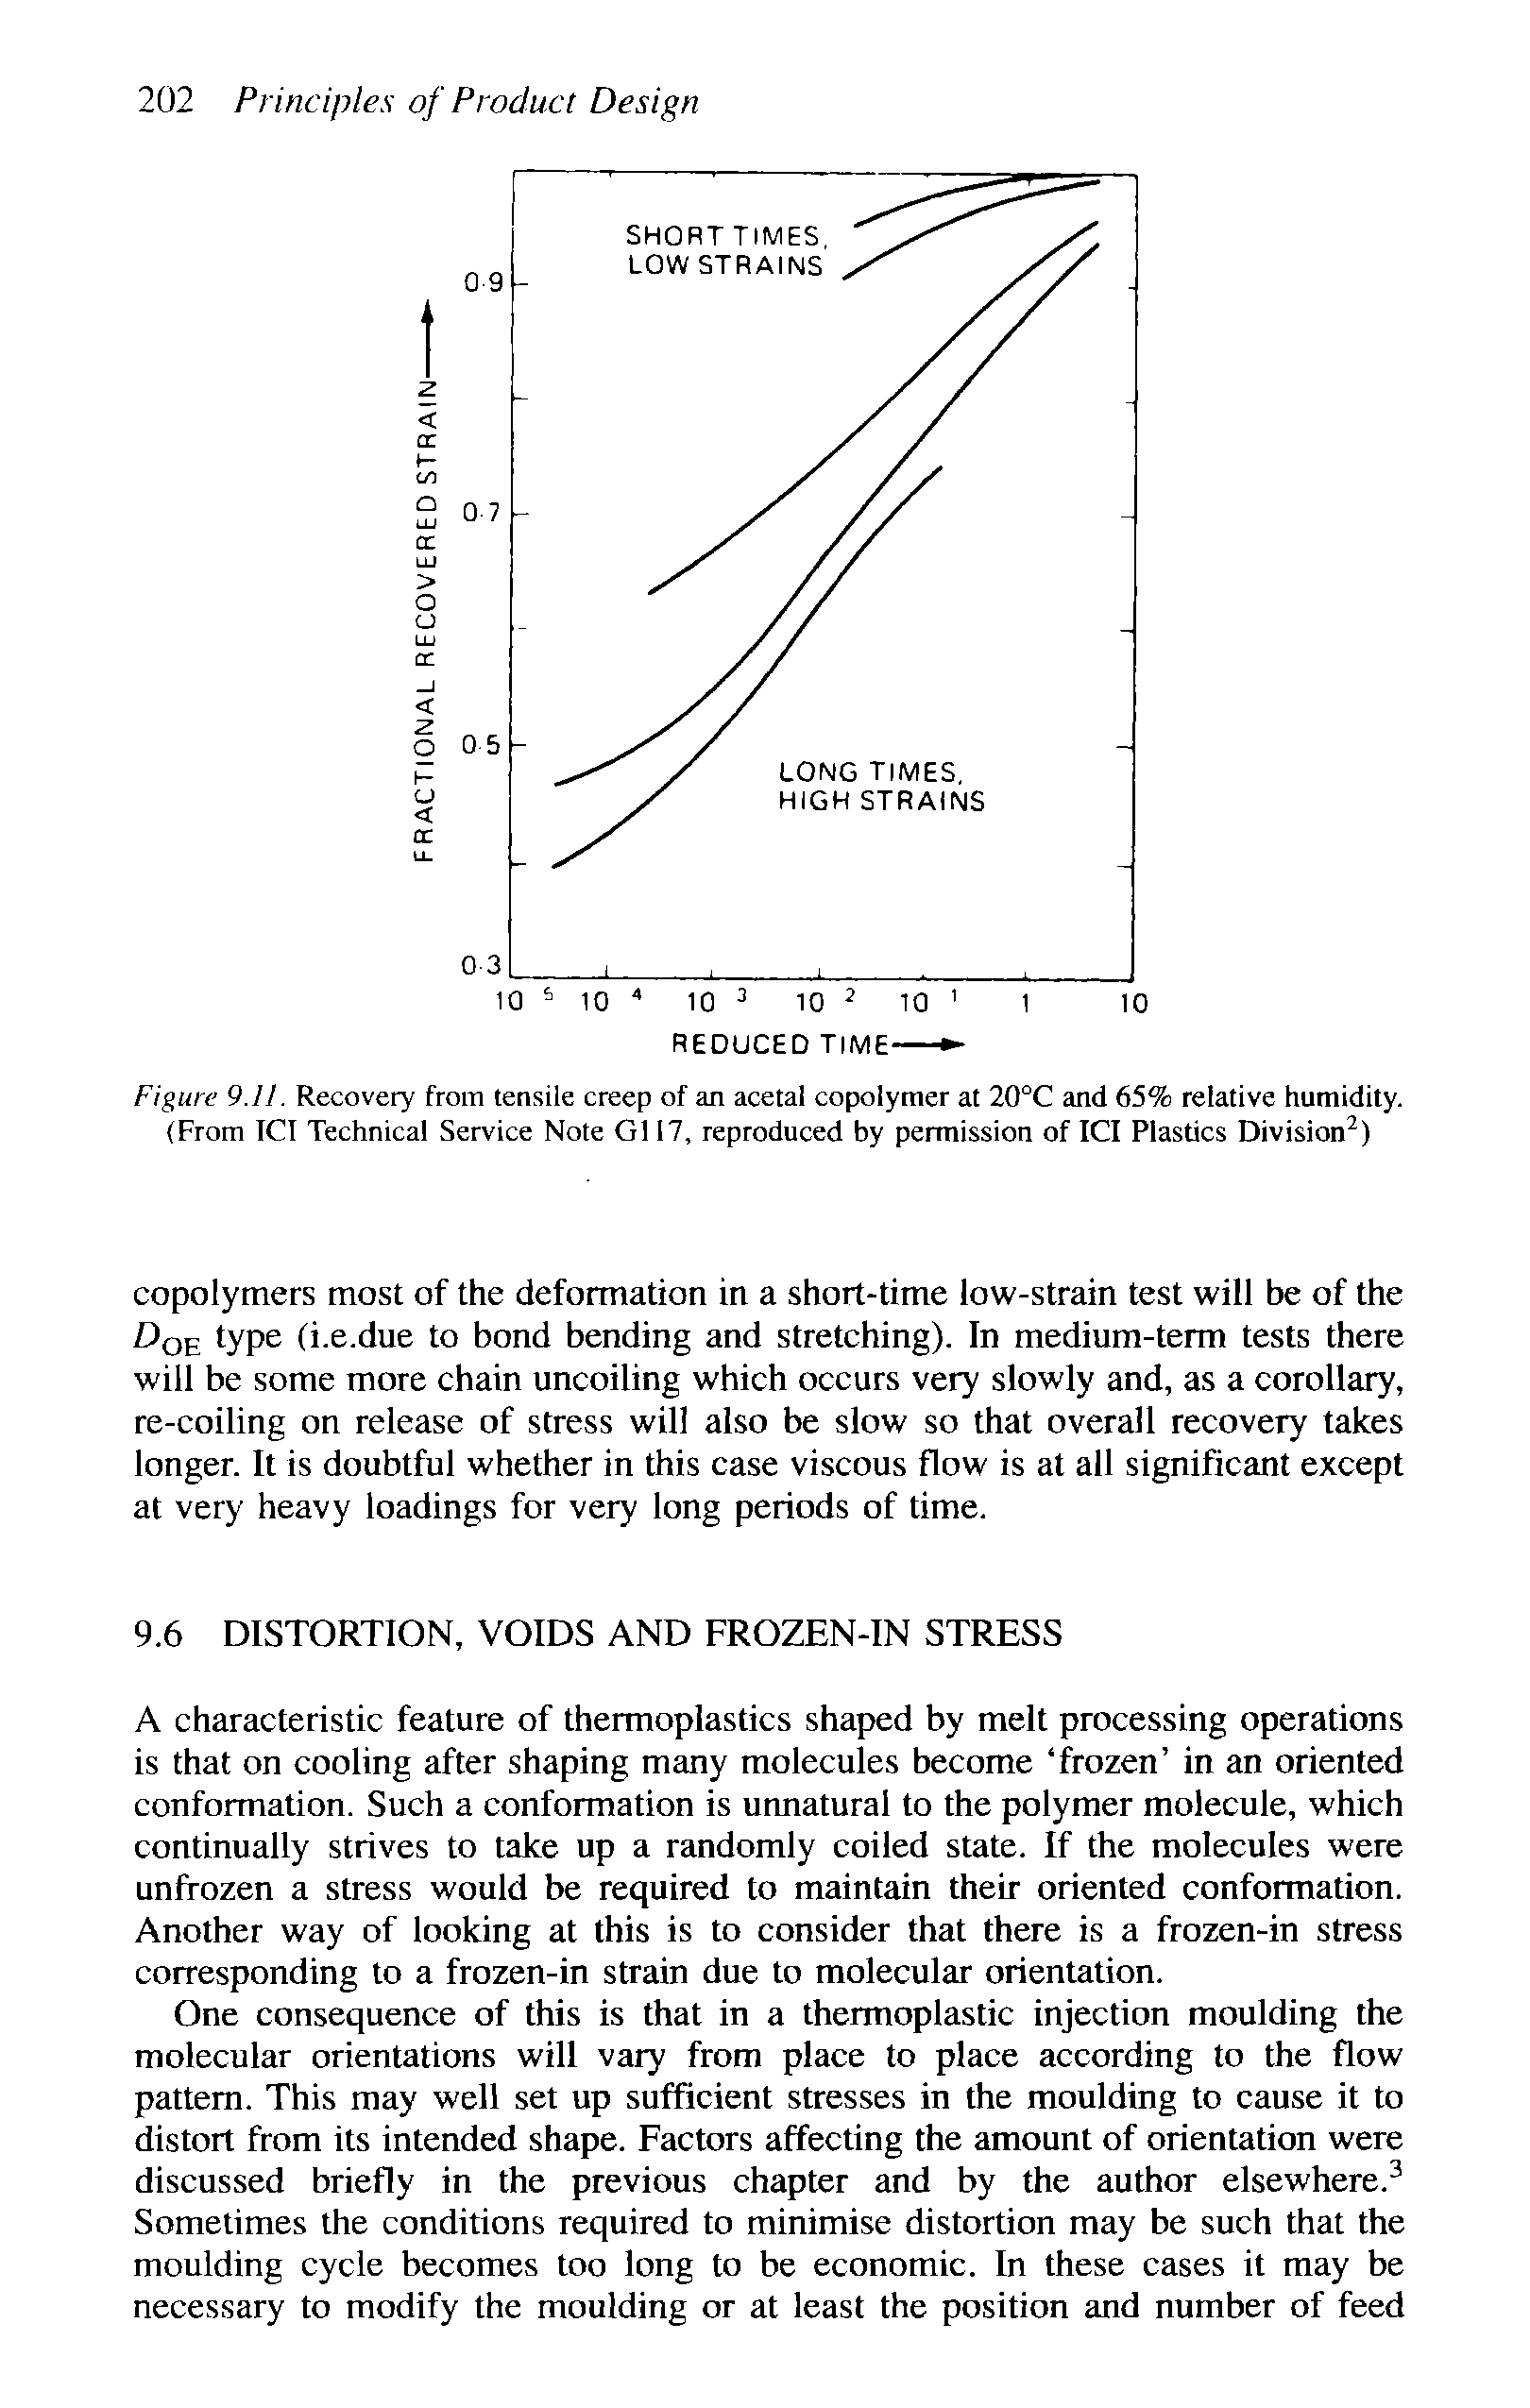 Figure 9.11. Recovery from tensile creep of an acetal copolymer at 20°C and 65% relative humidity. (From TCI Technical Service Note G117, reproduced by permission of ICI Plastics Division )...